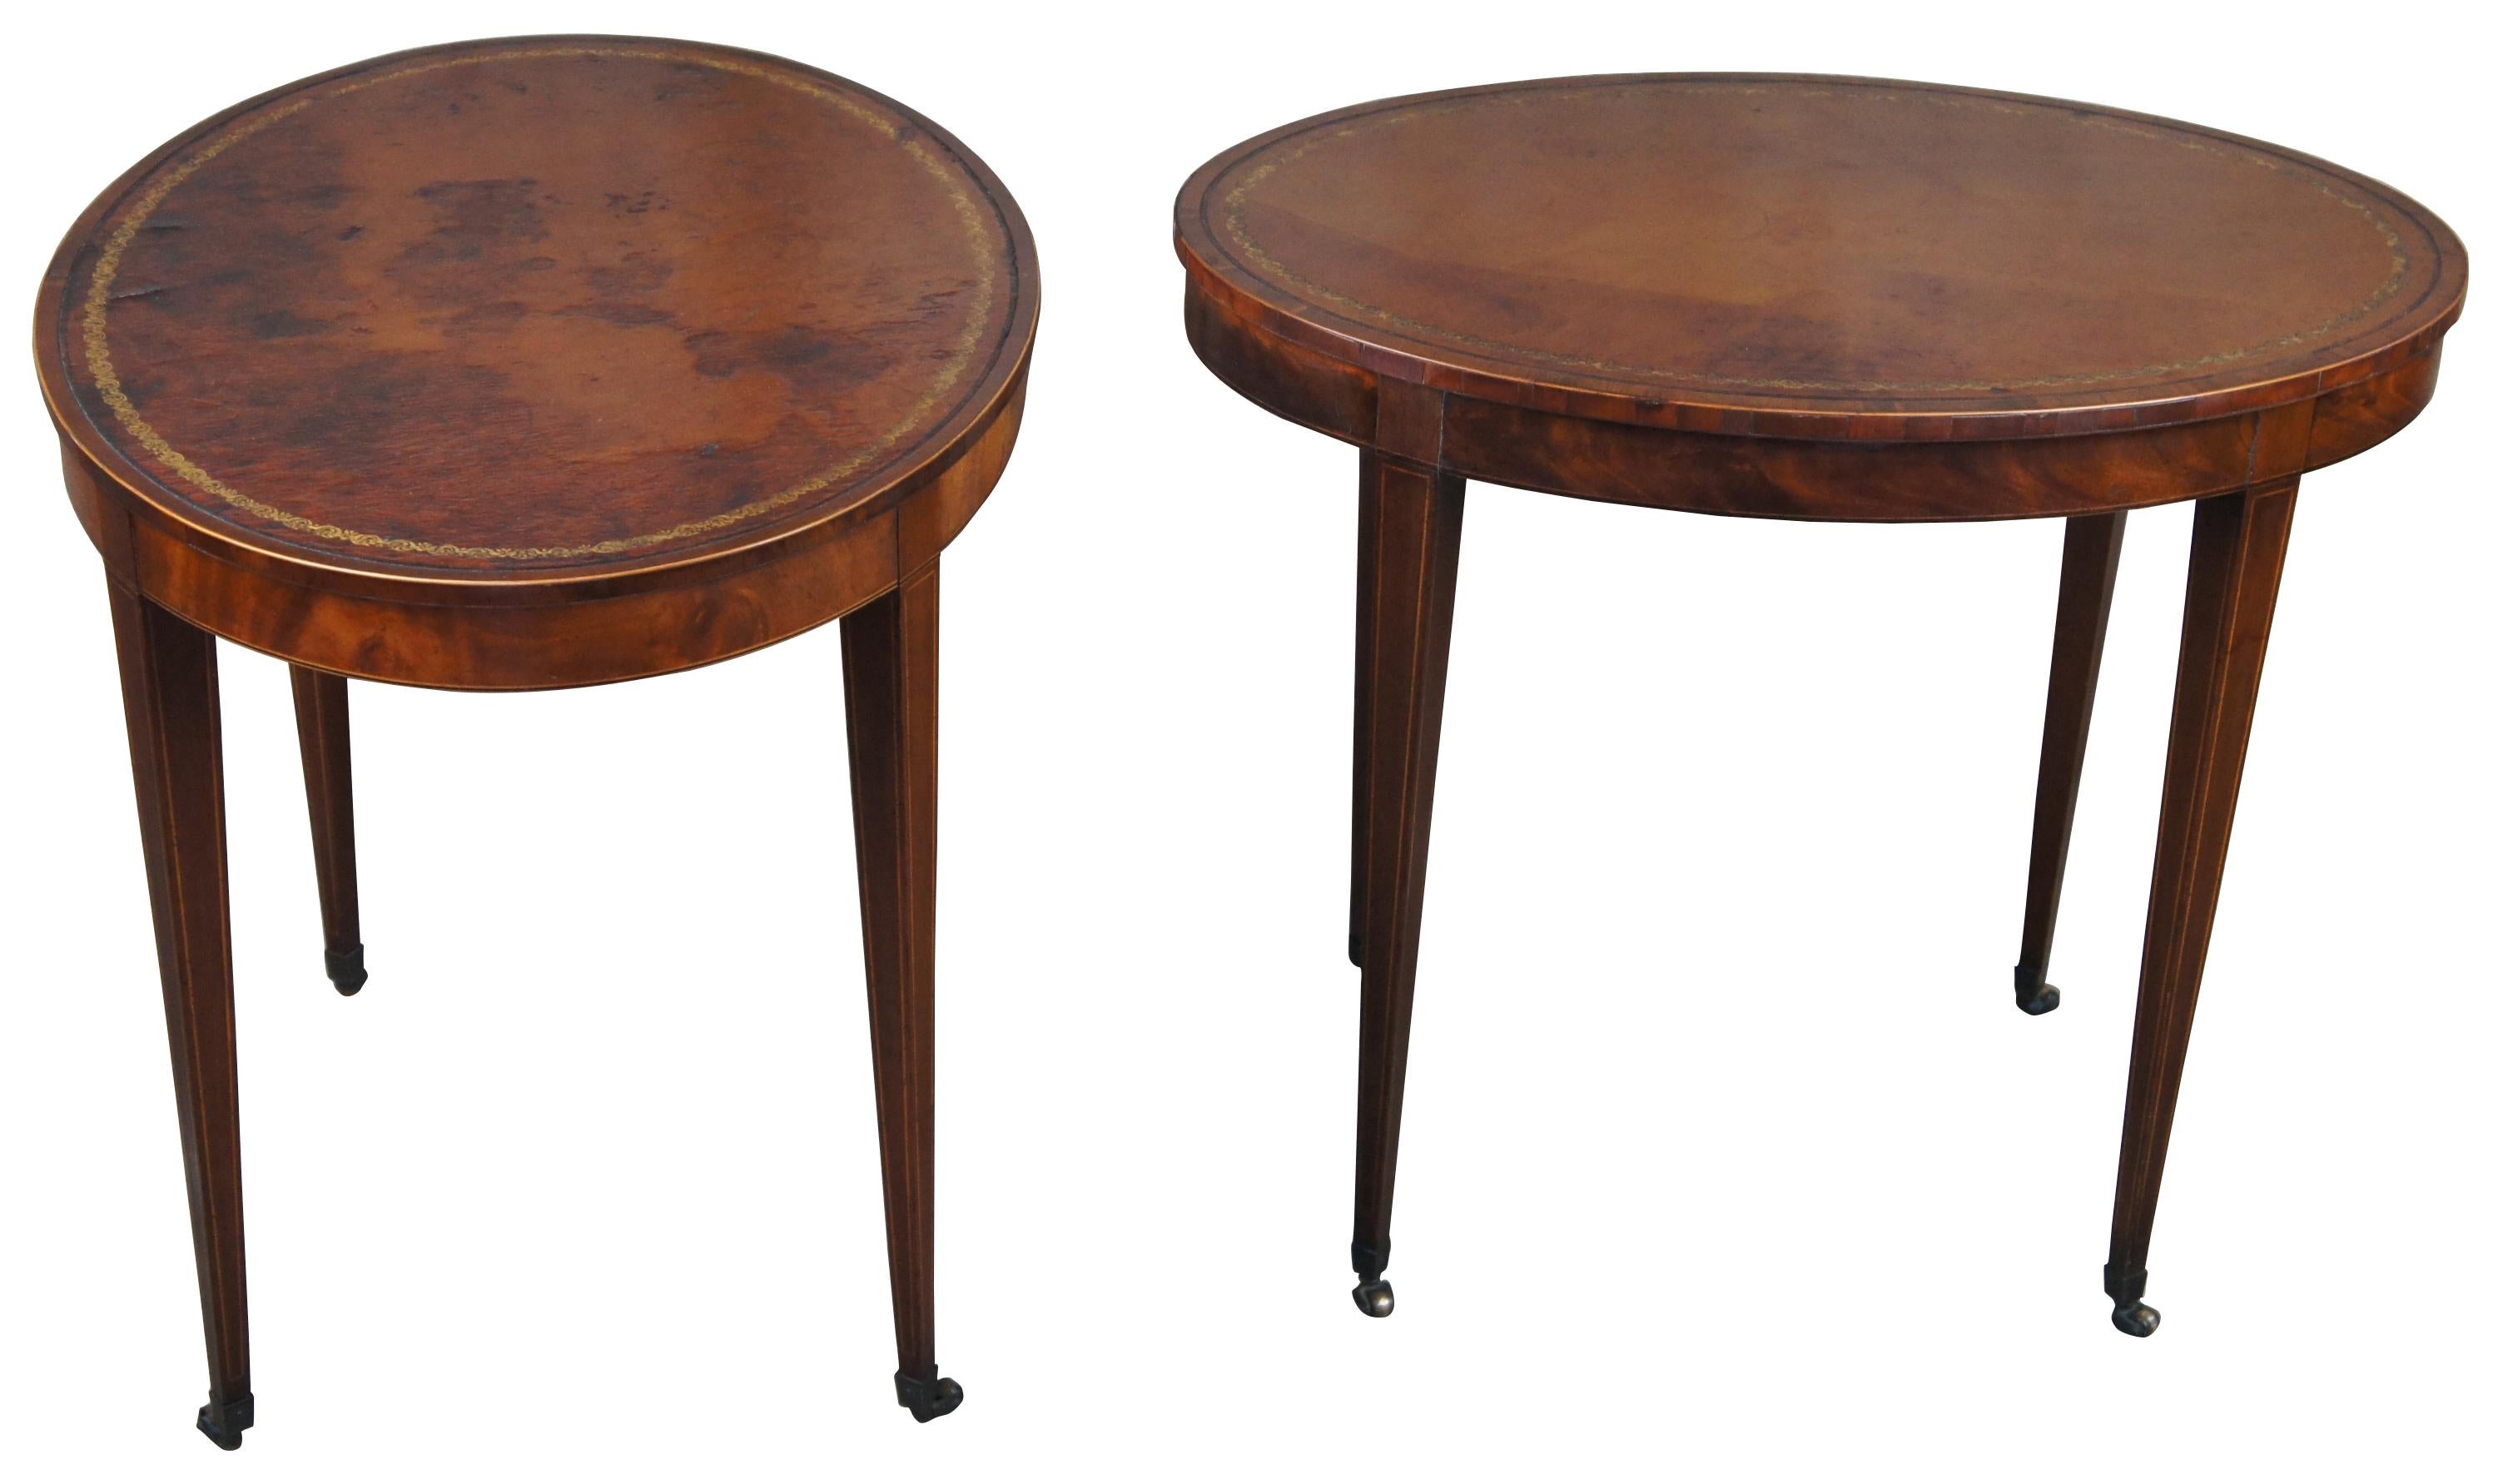 Early Baker Furniture oval side tables, circa 1940s.  Made from flame mahogany with tooled leather tops.  Features inlay and square tapered legs leading to castors.  Drawing inspiration from Sheraton and Hepplewhite styling.

Table 1 - 30